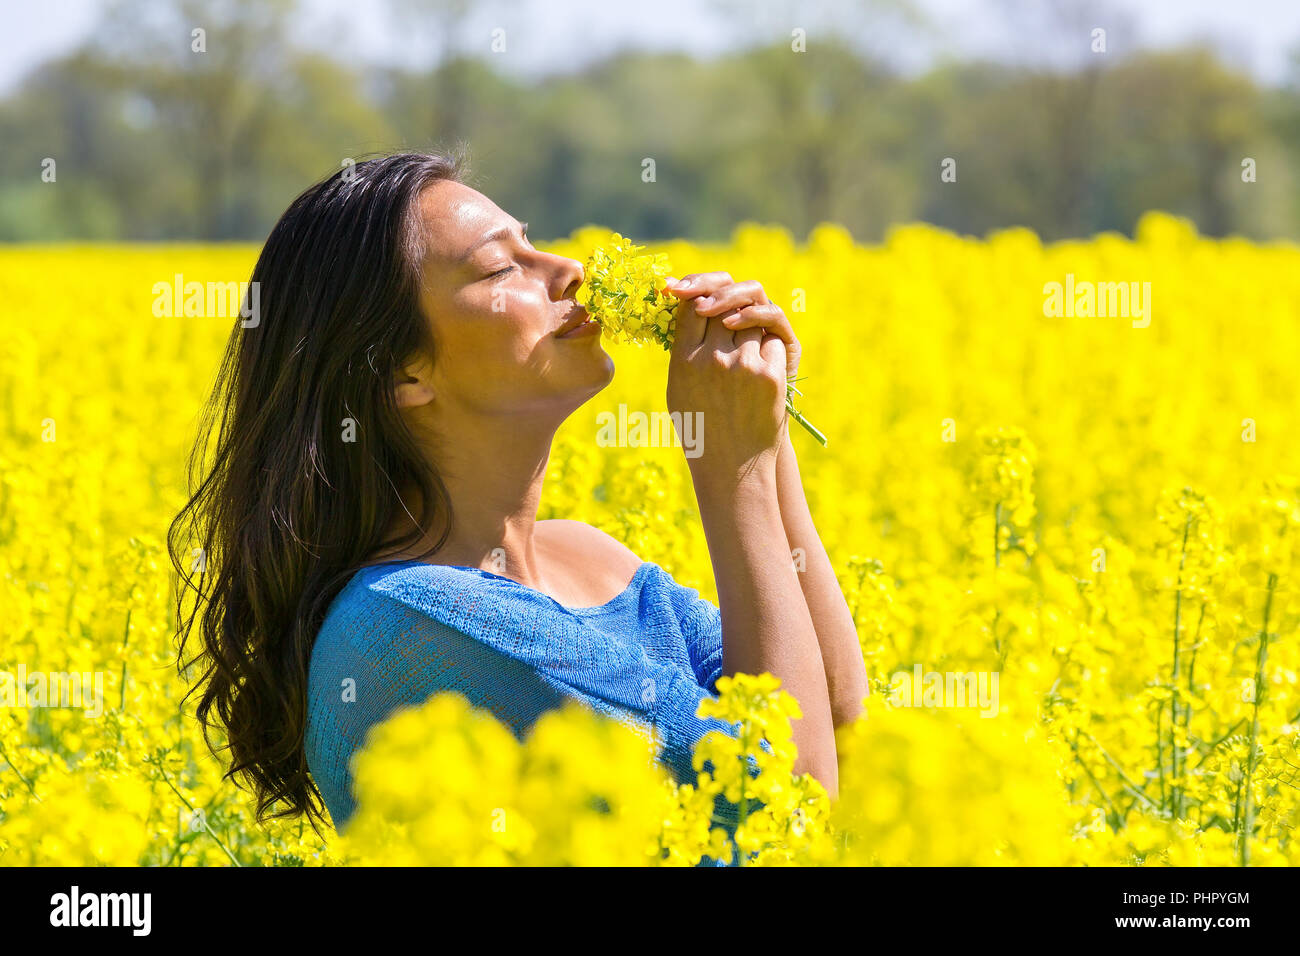 Woman smelling flowers in yellow rapeseed field Banque D'Images